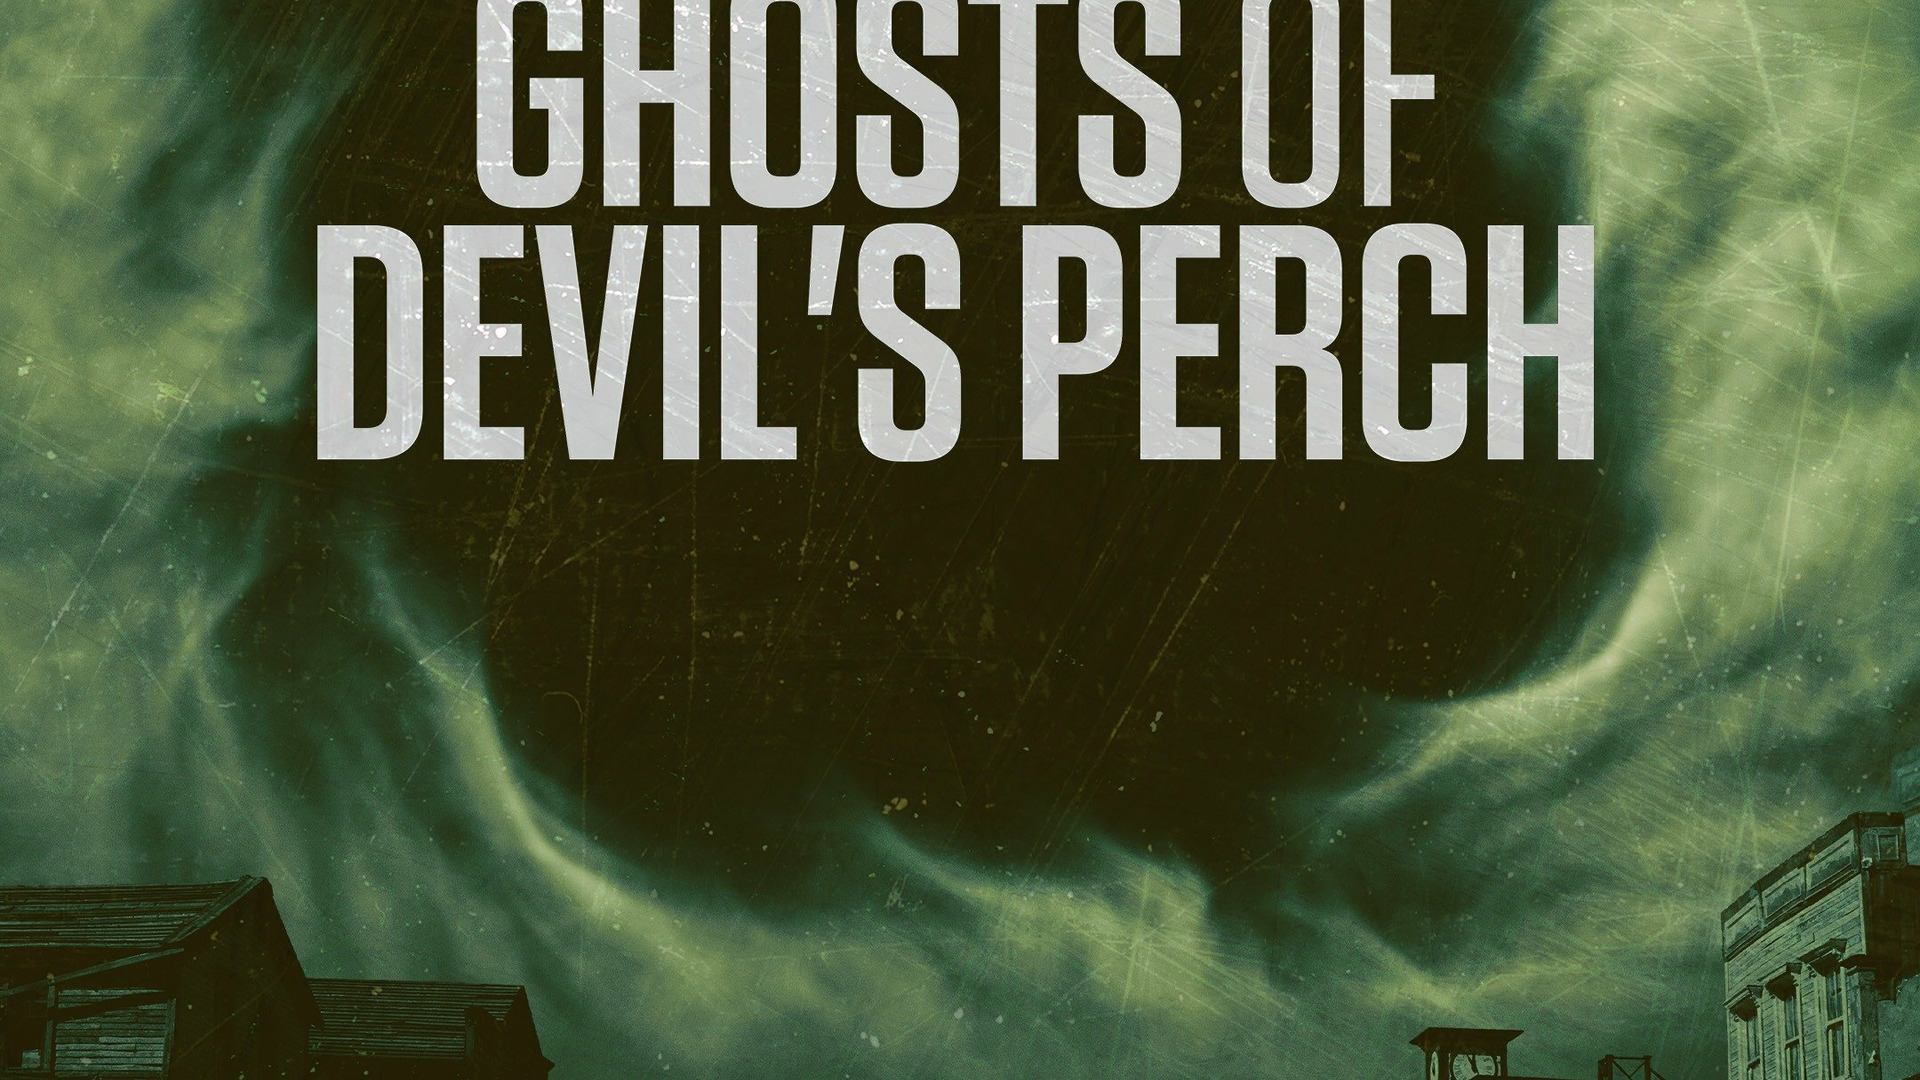 Show Ghosts of Devil's Perch